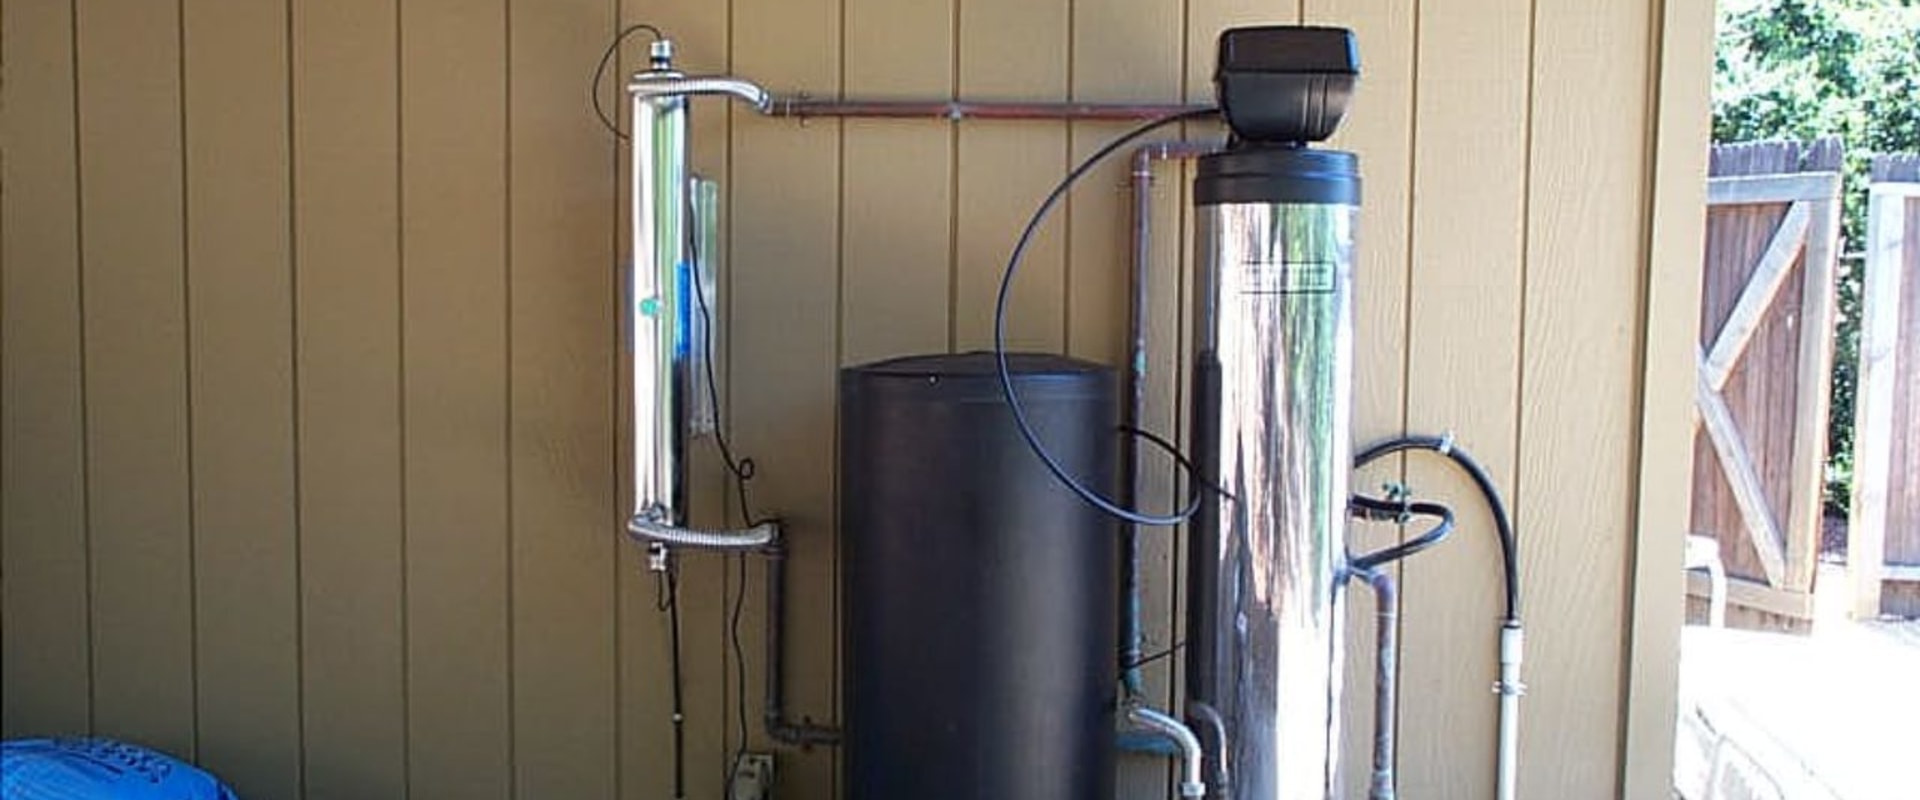 Is Your UV Light or Ozone-Based Water Filtration System Working Properly?